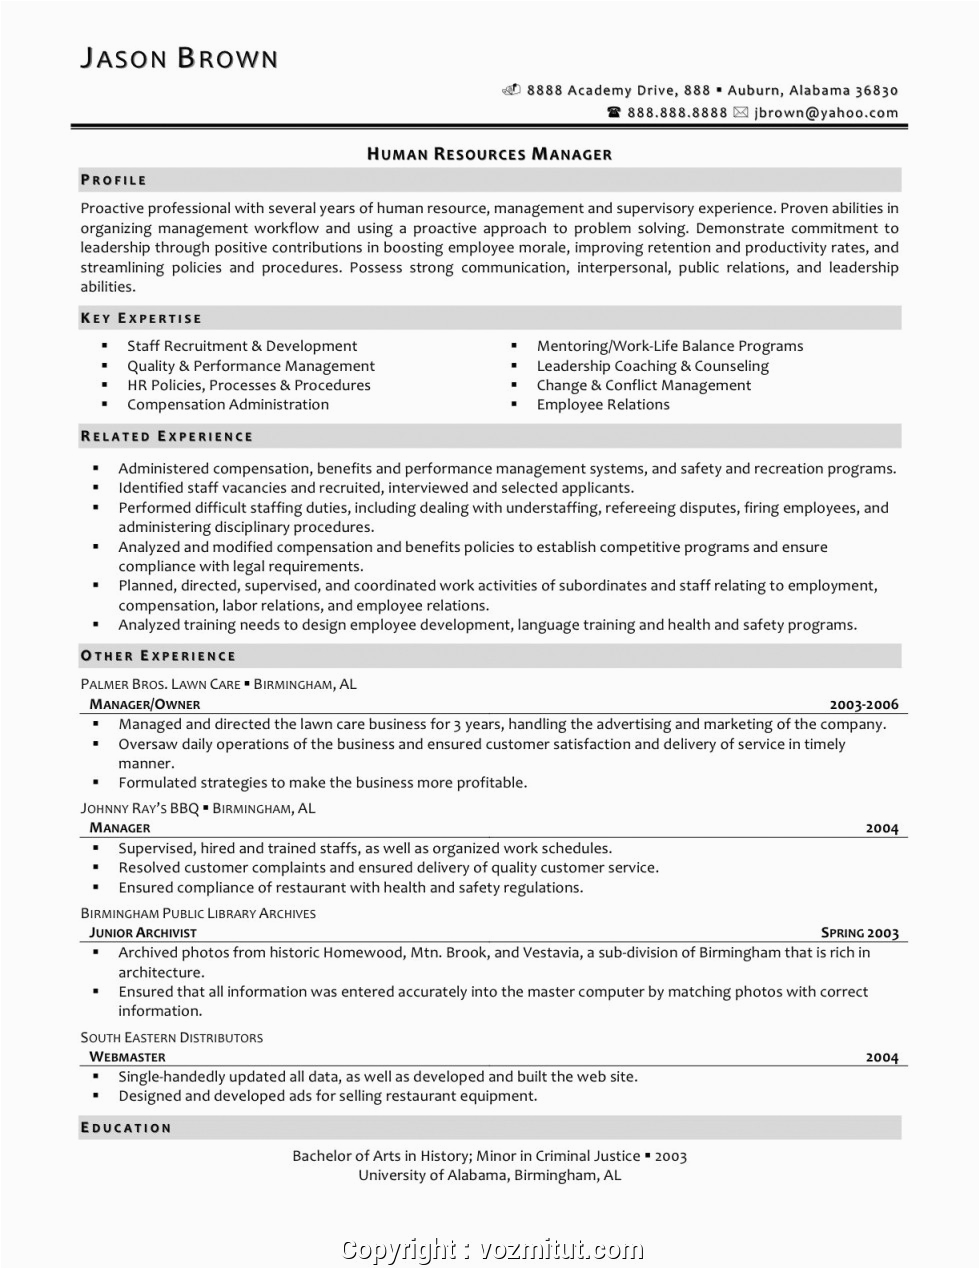 print resume manager human resources